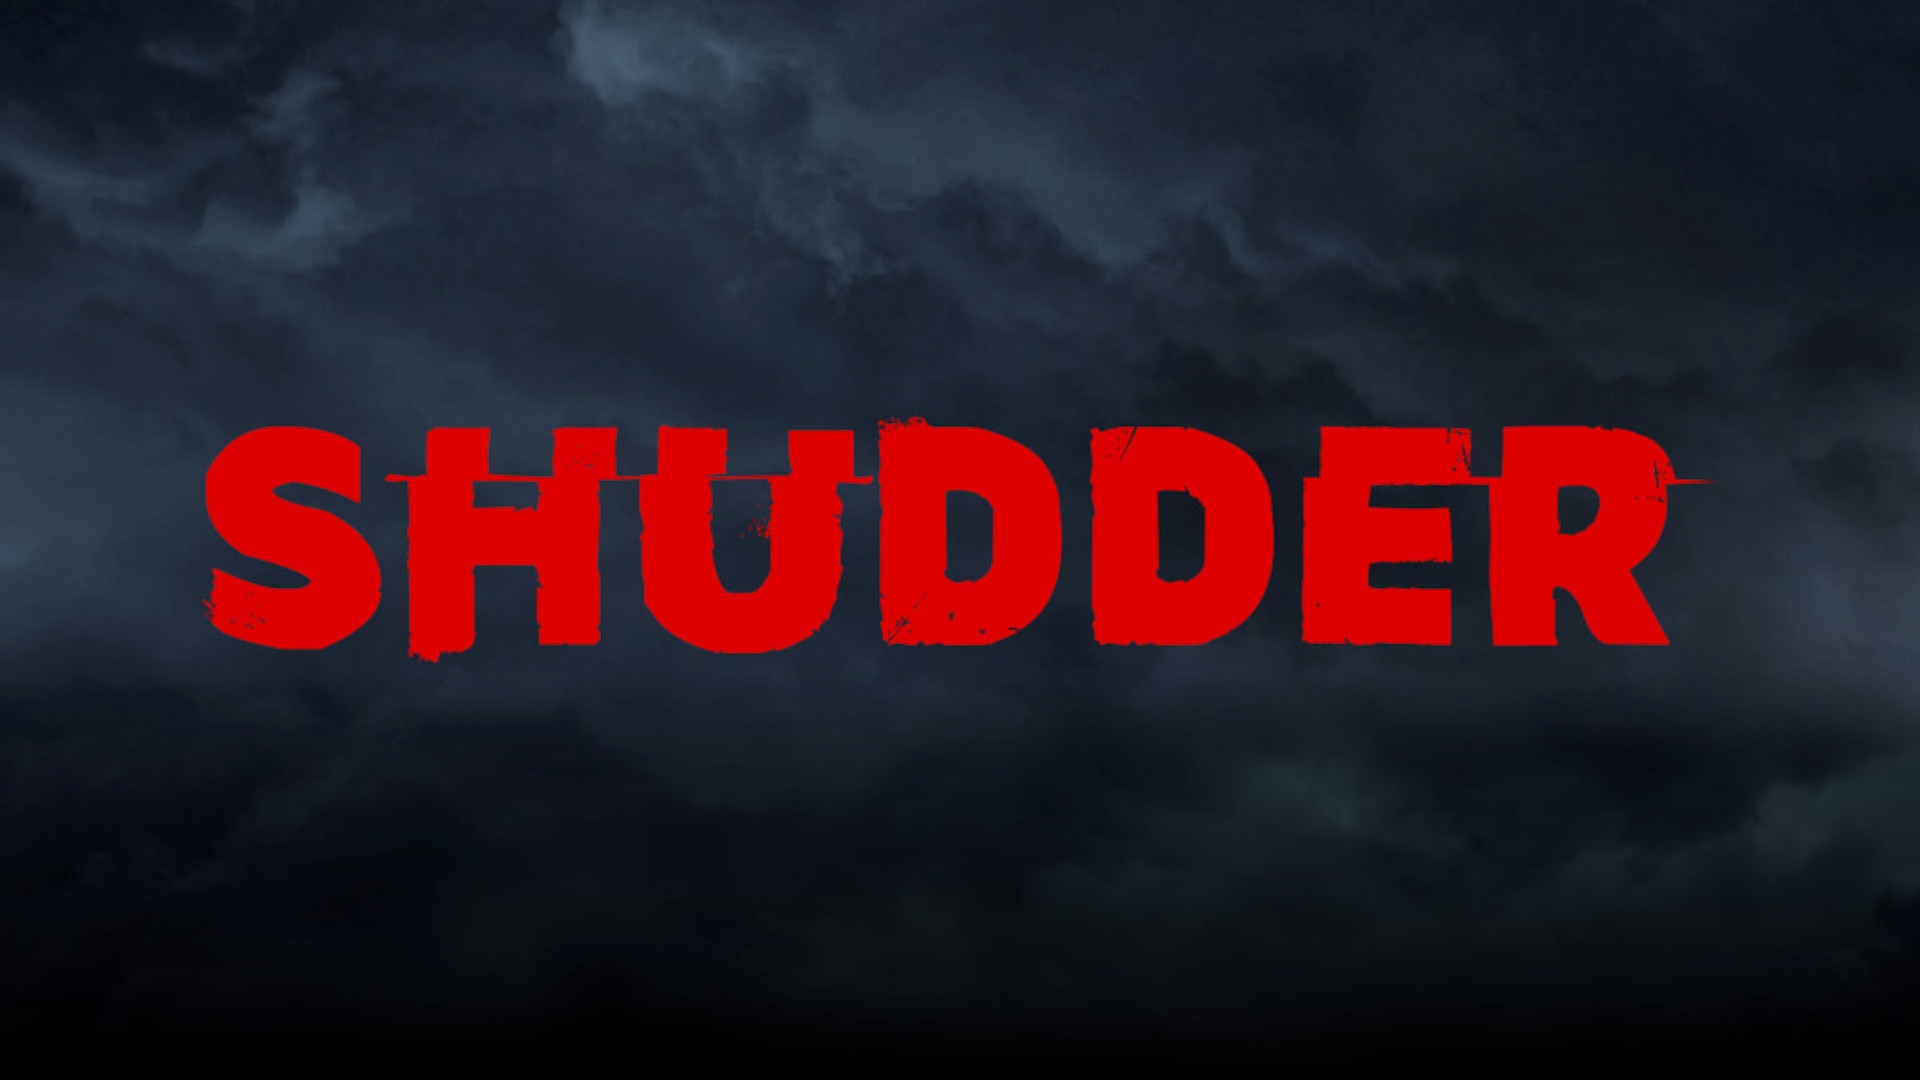 Best streaming service, Shudder - its logo is a blood red against a stormy sky.